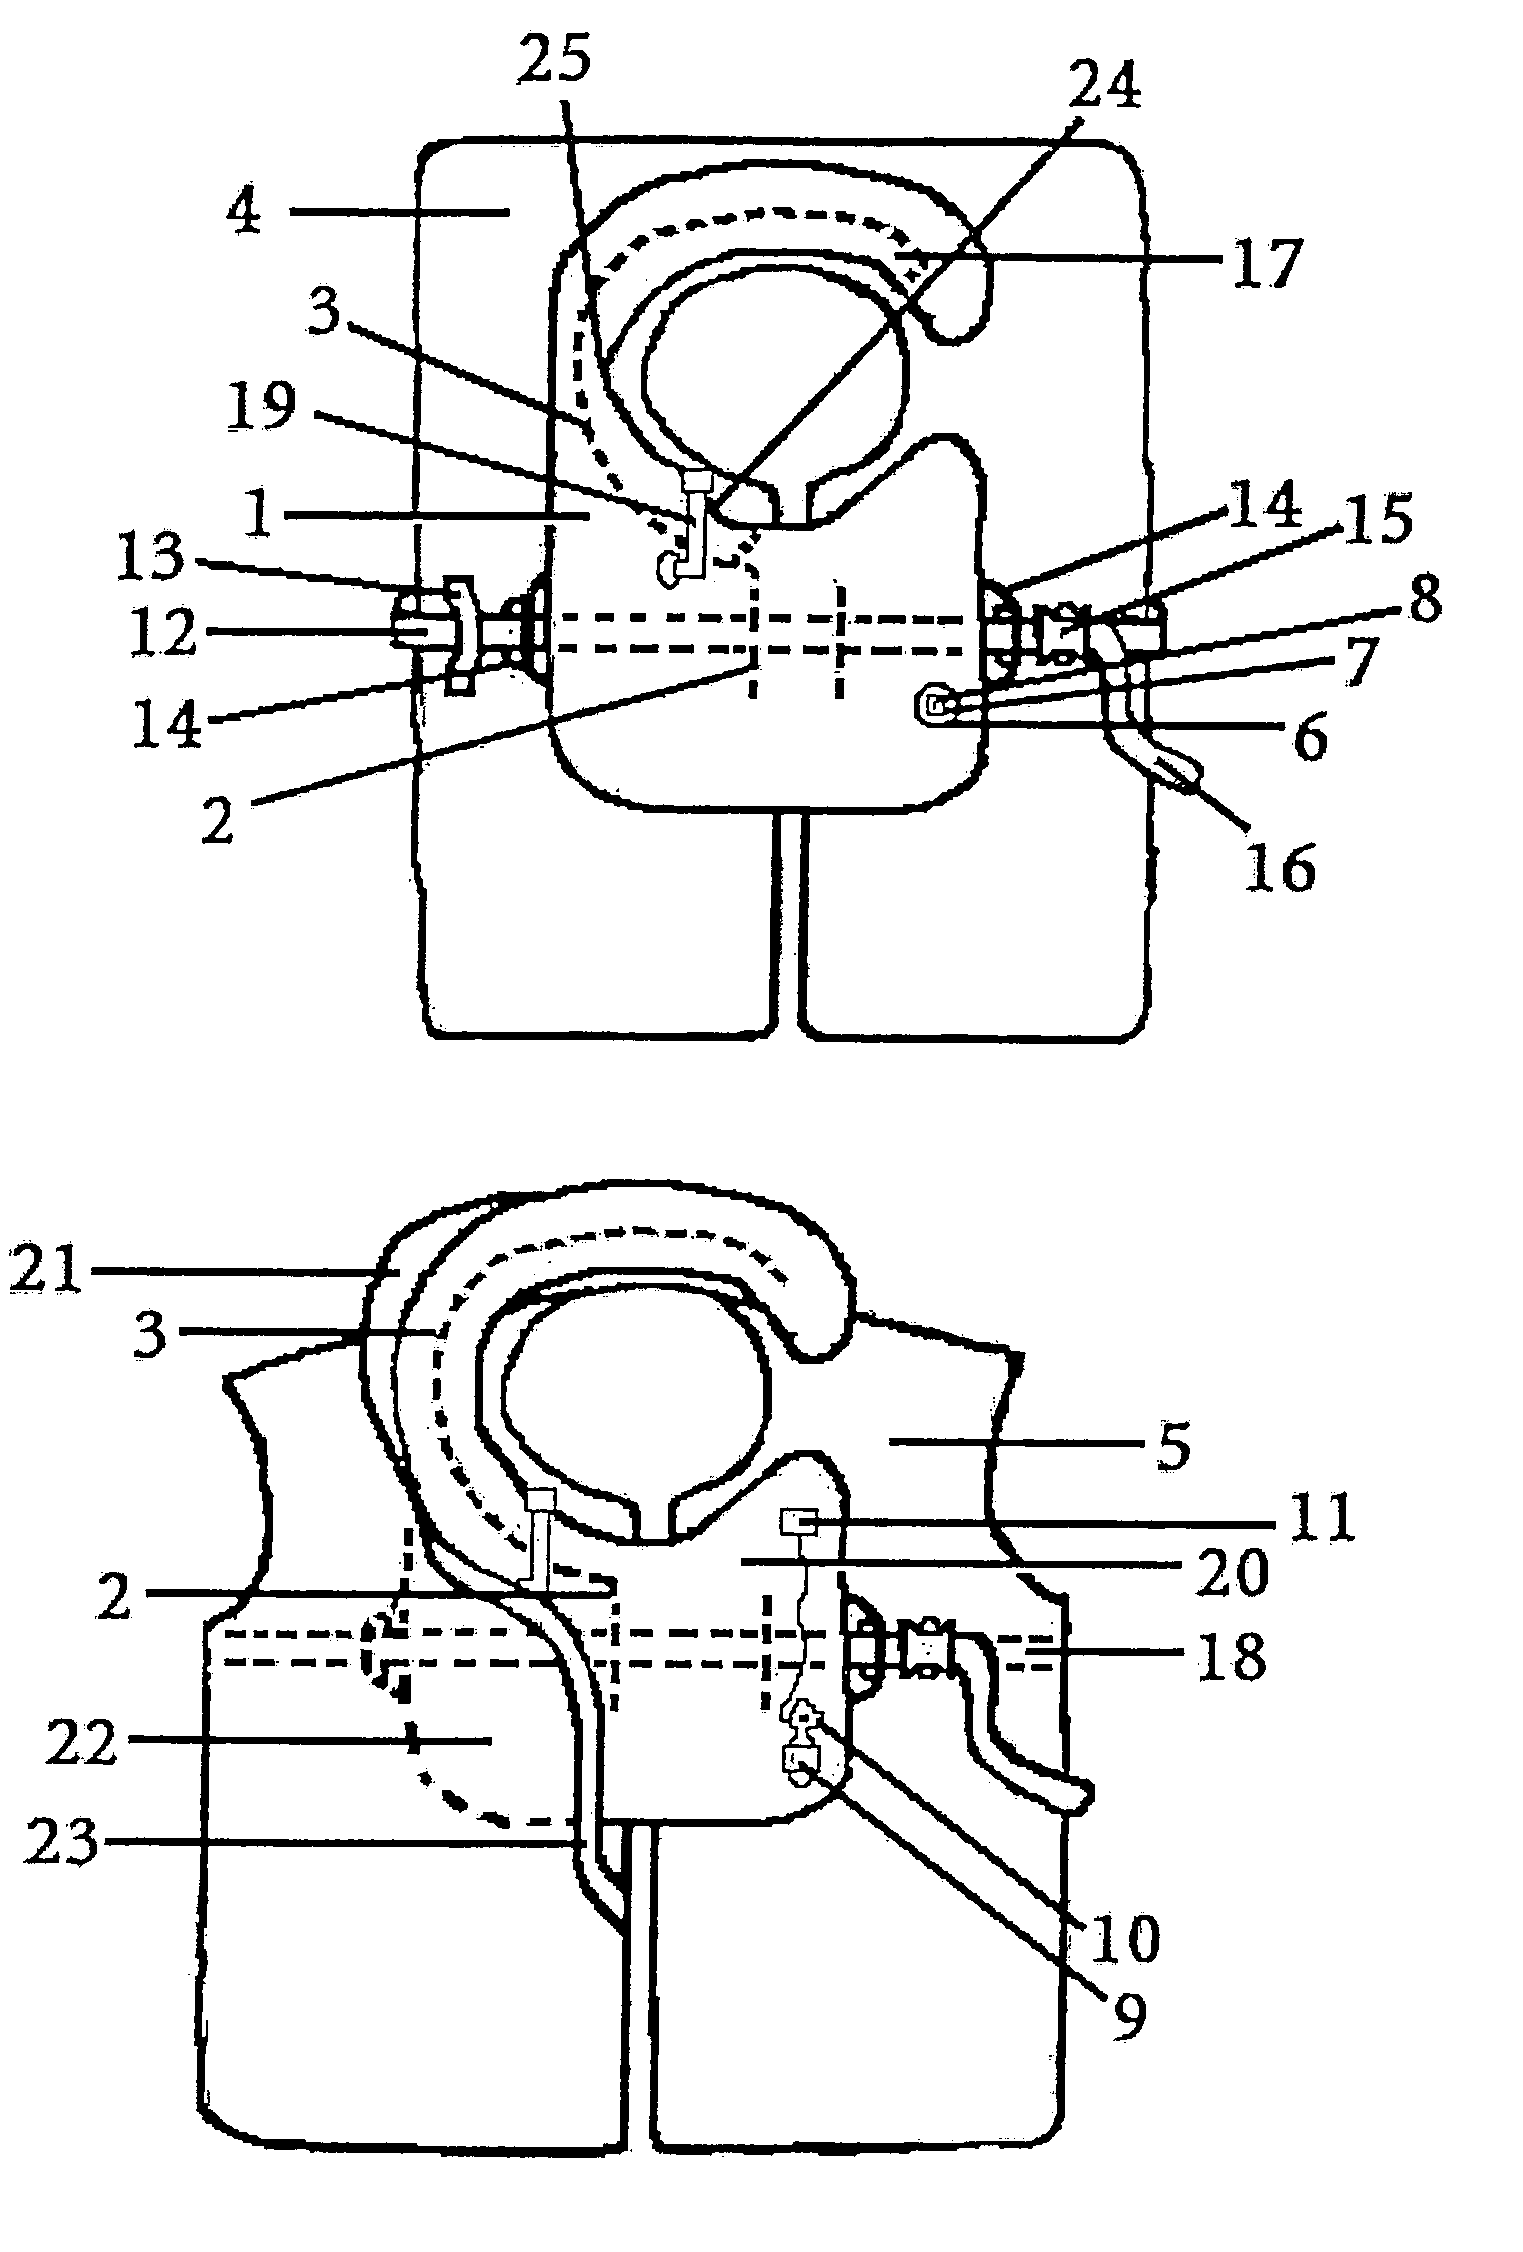 Combination inflator and manifold assembly